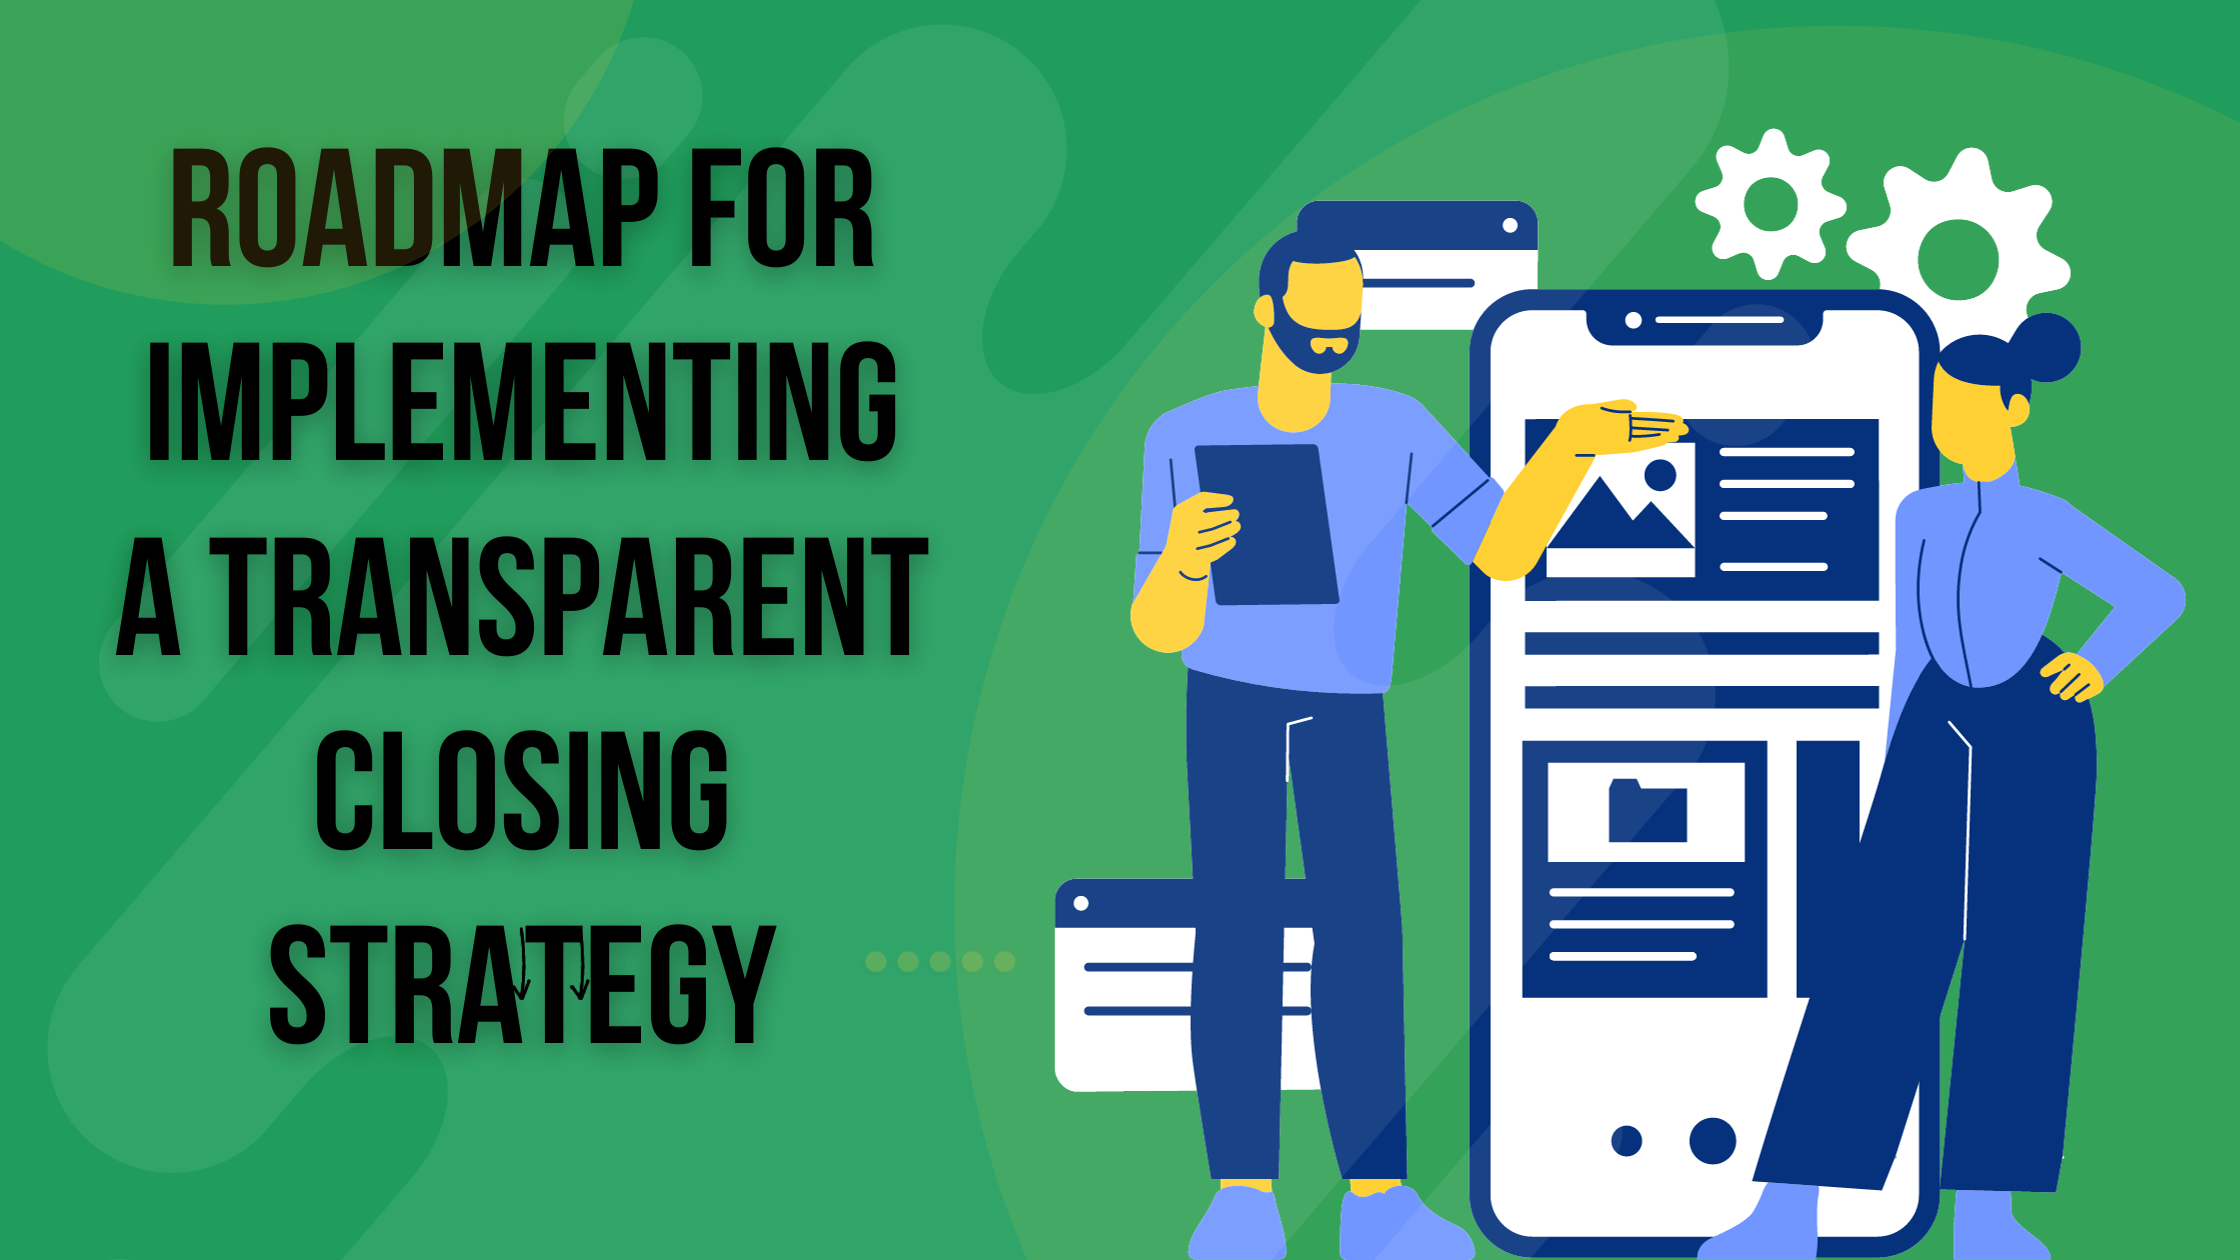 Roadmap for Implementing a Transparent Closing Strategy